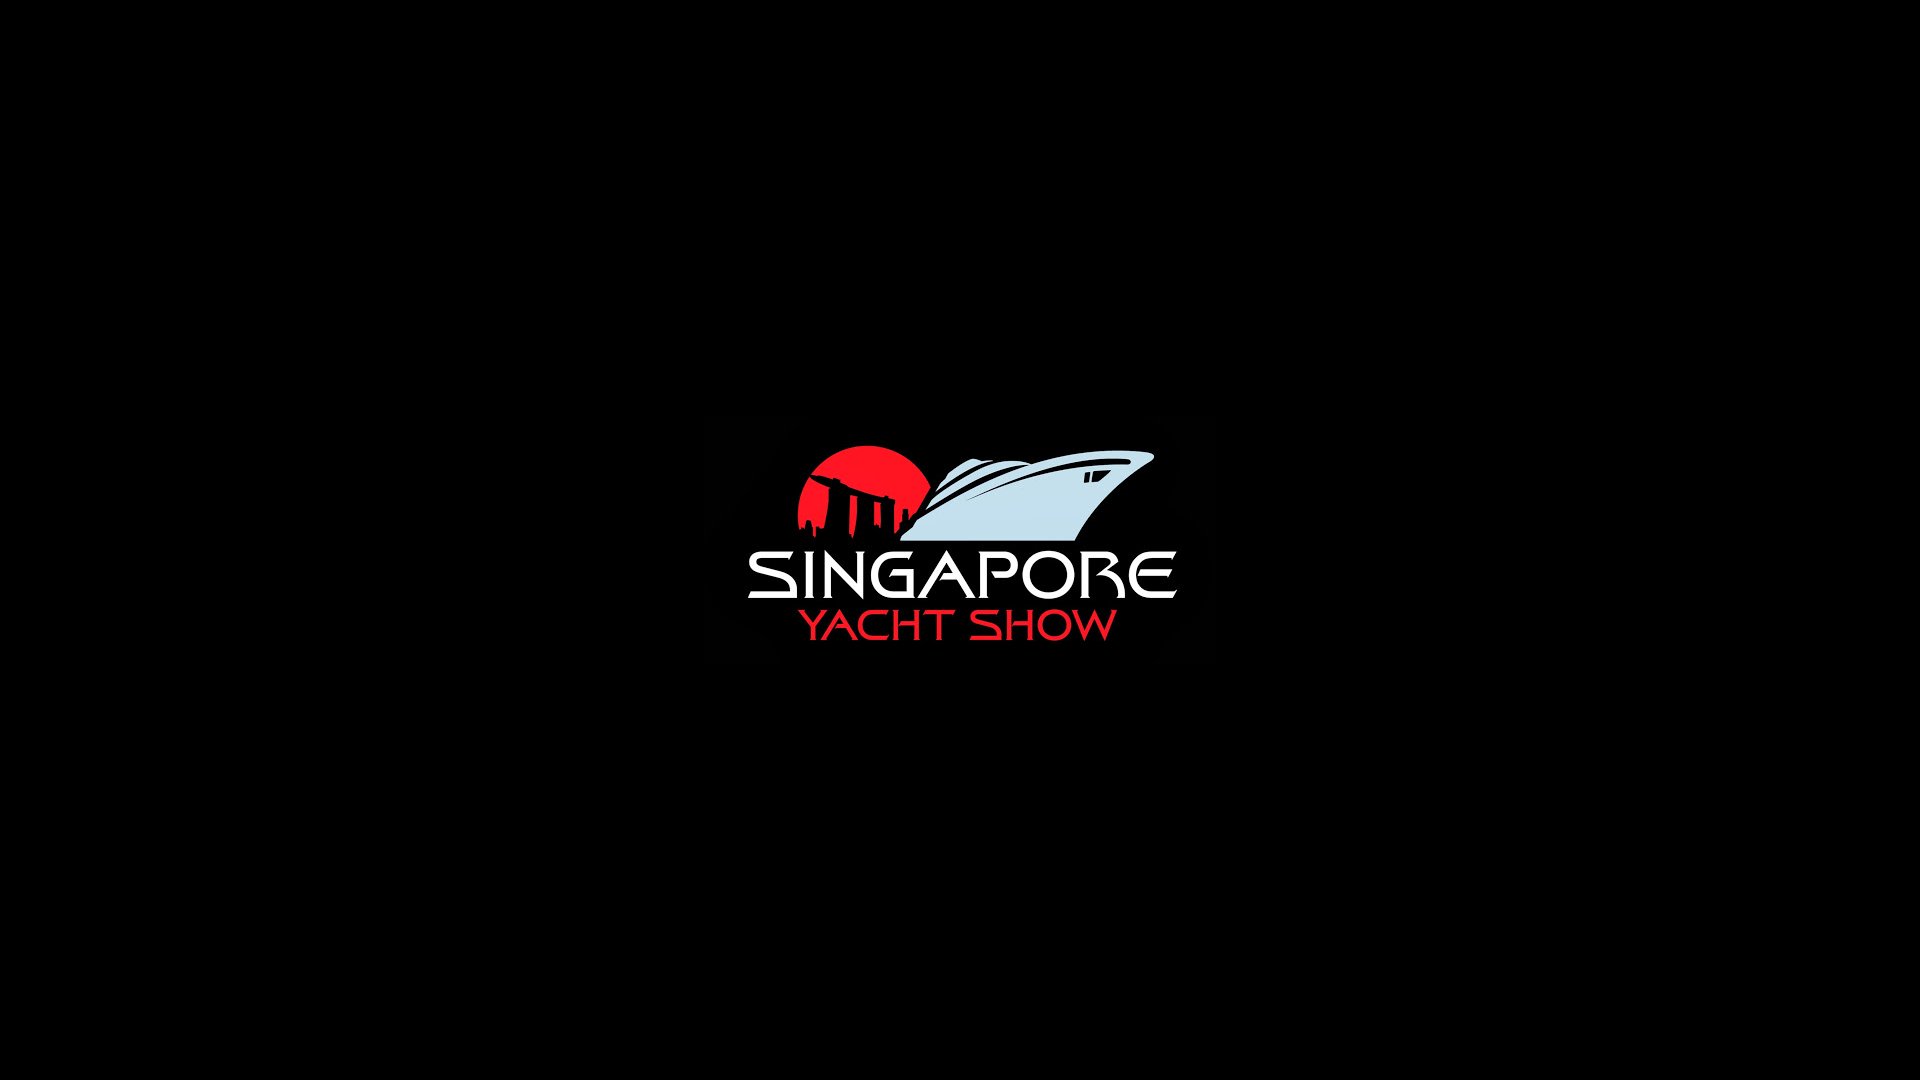 360 VR Virtual Tours of the Singapore Yacht Show